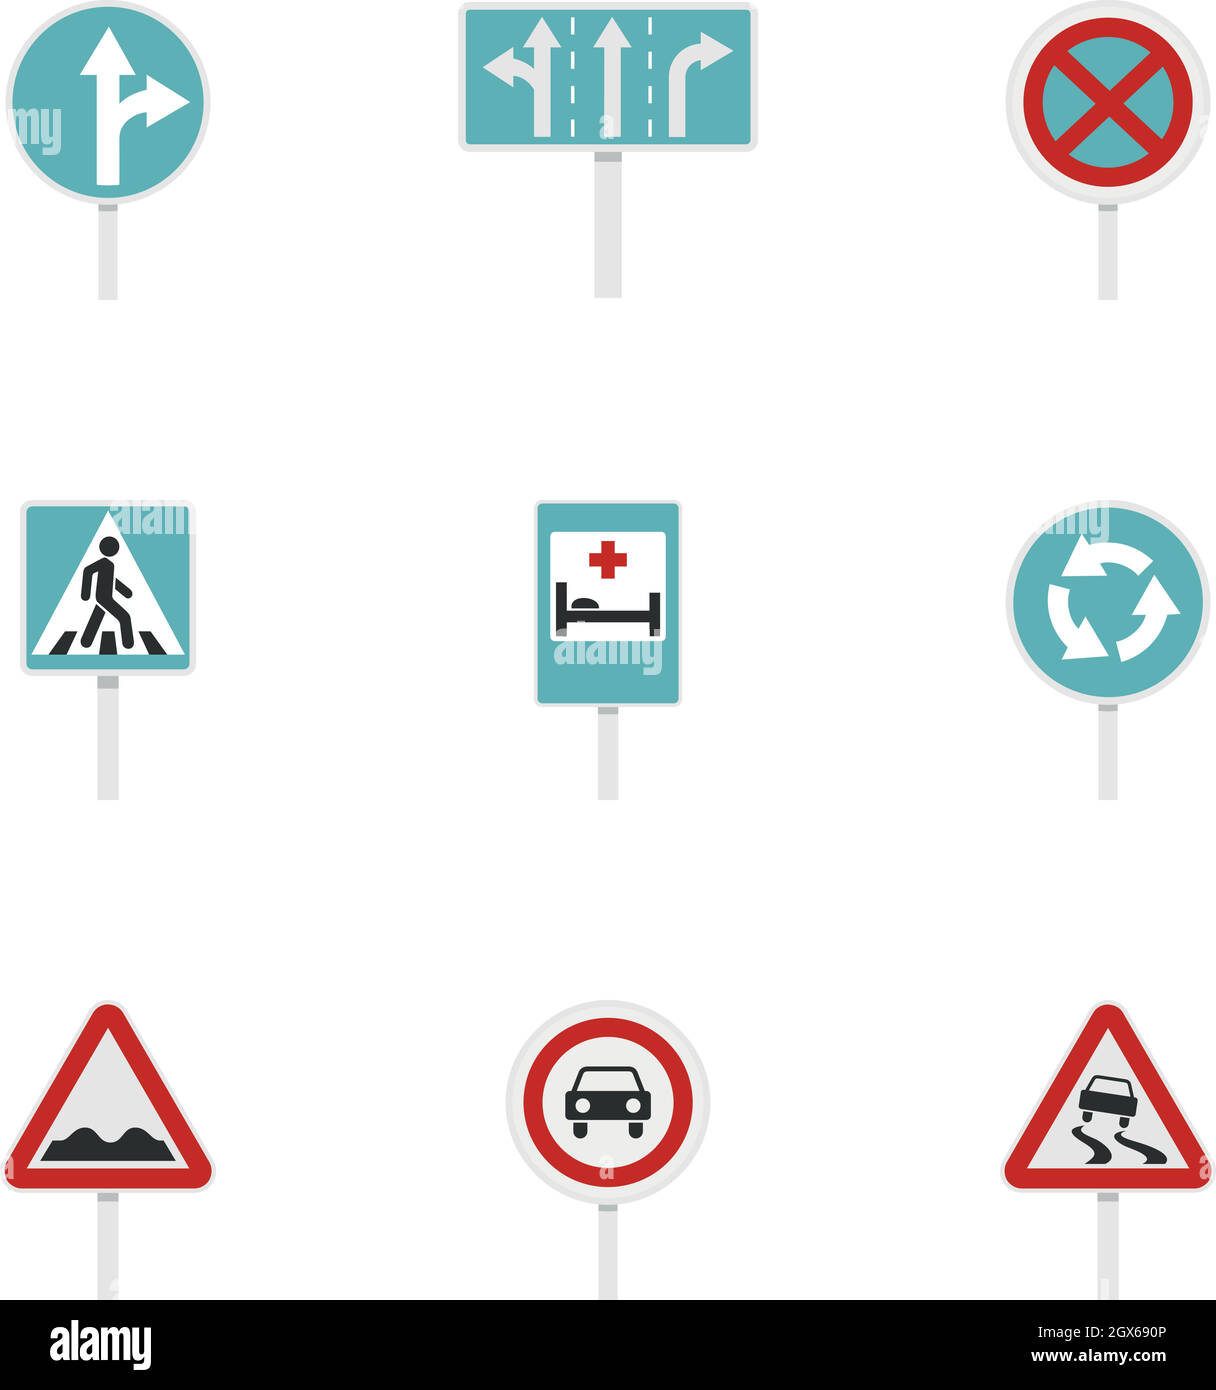 Traffic sign icons set, flat style Stock Vector